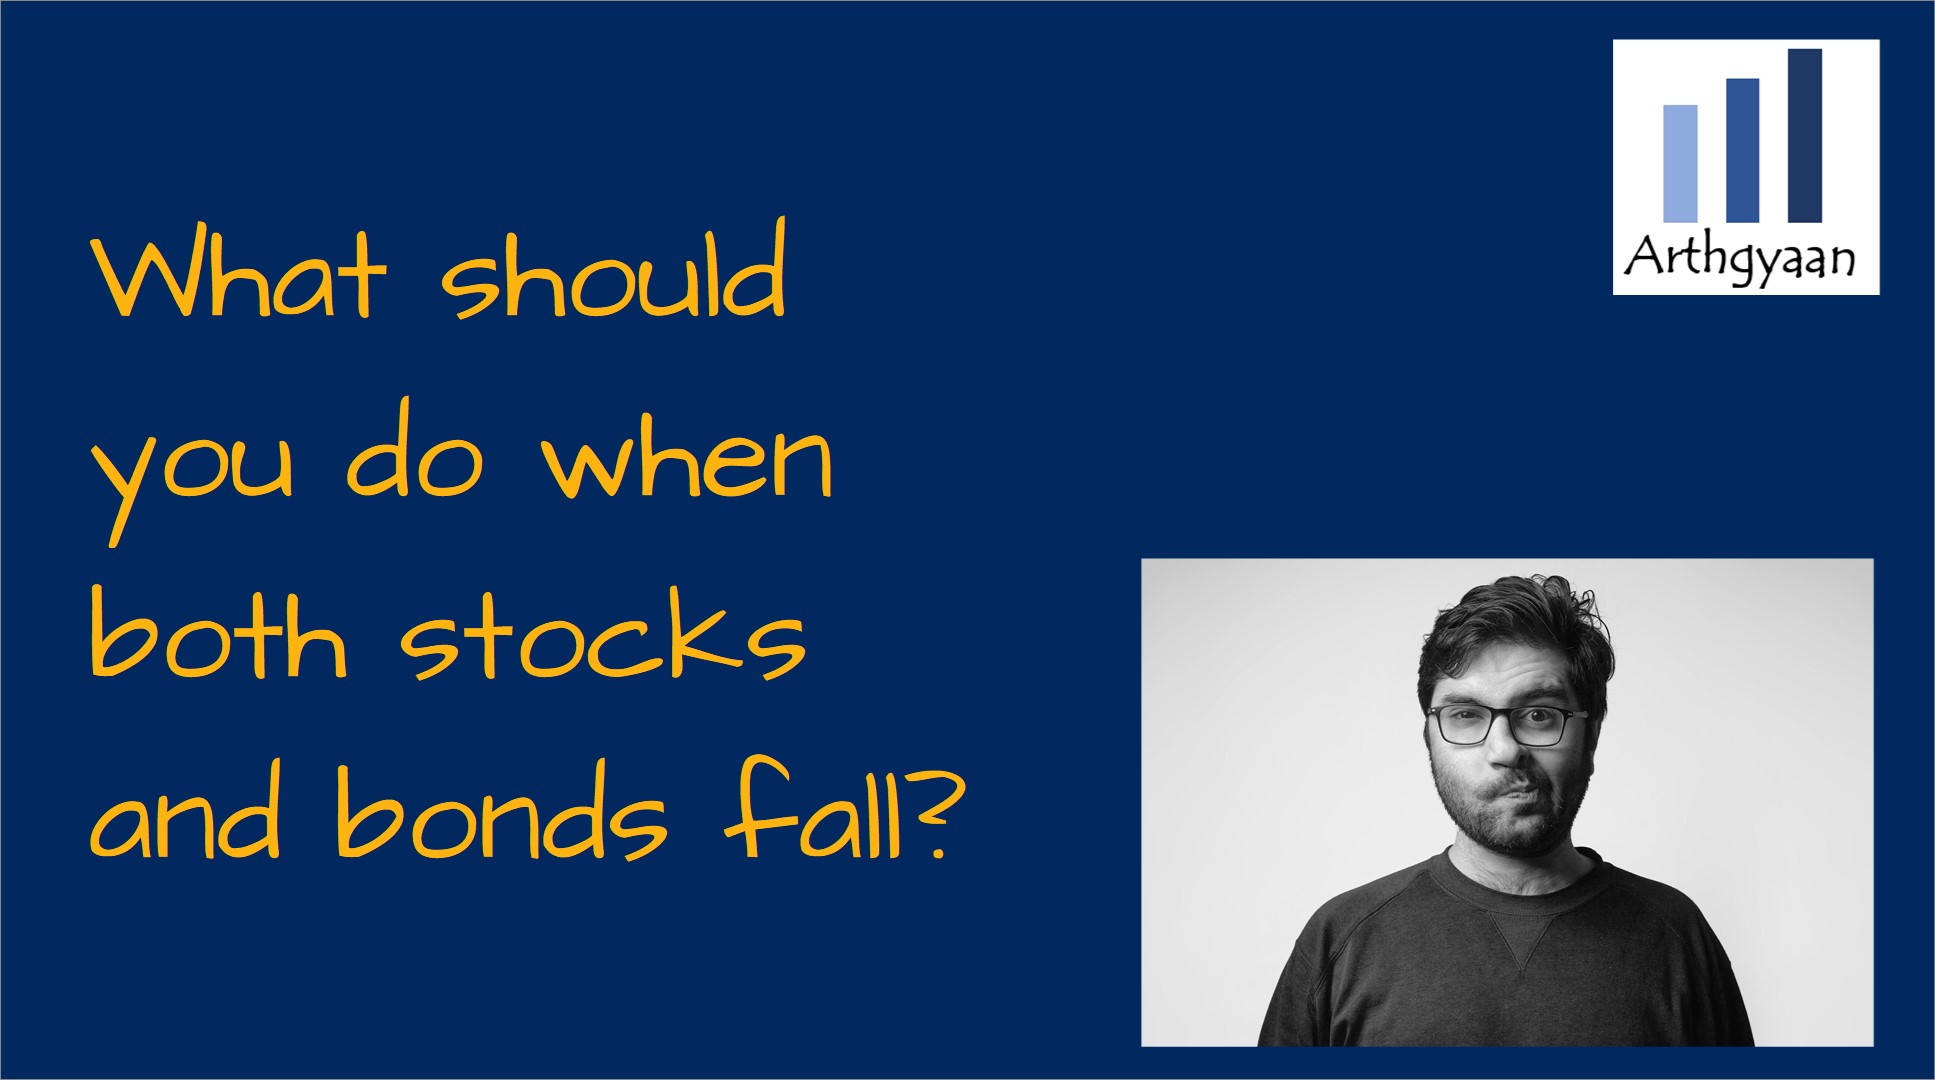 What should you do when both stocks and bonds fall?